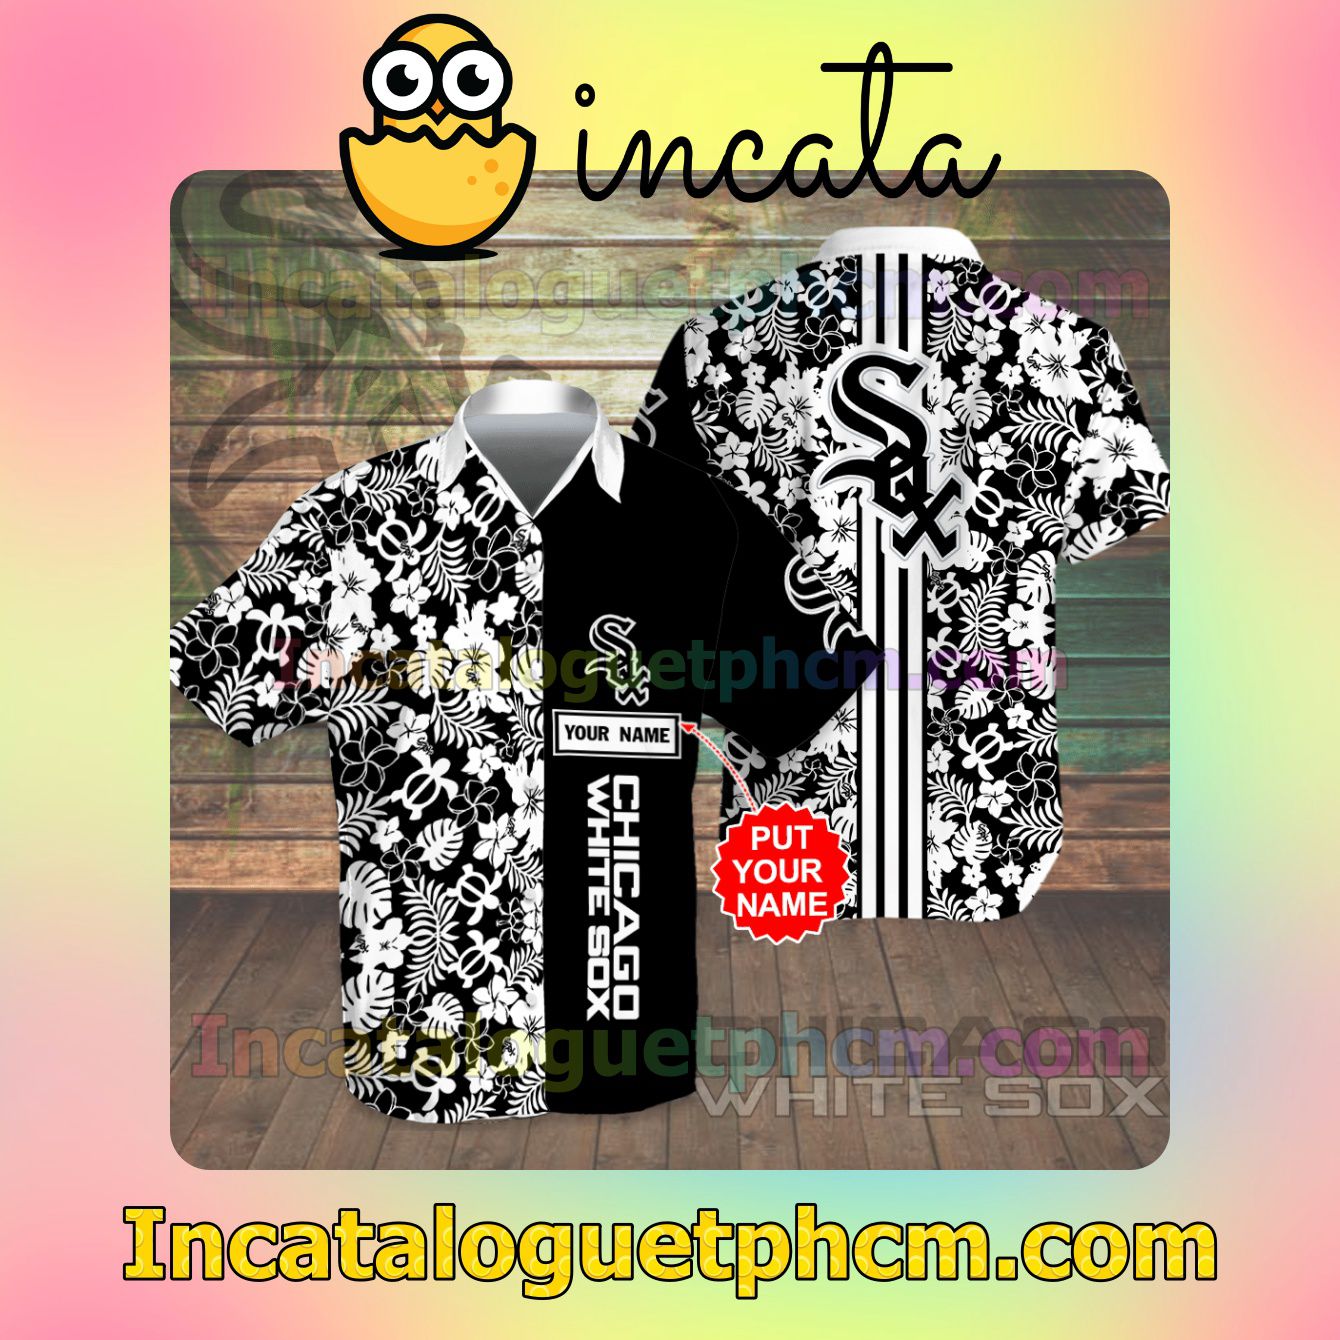 Personalized Chicago White Sox Flowery Black Button Shirt And Swim Trunk